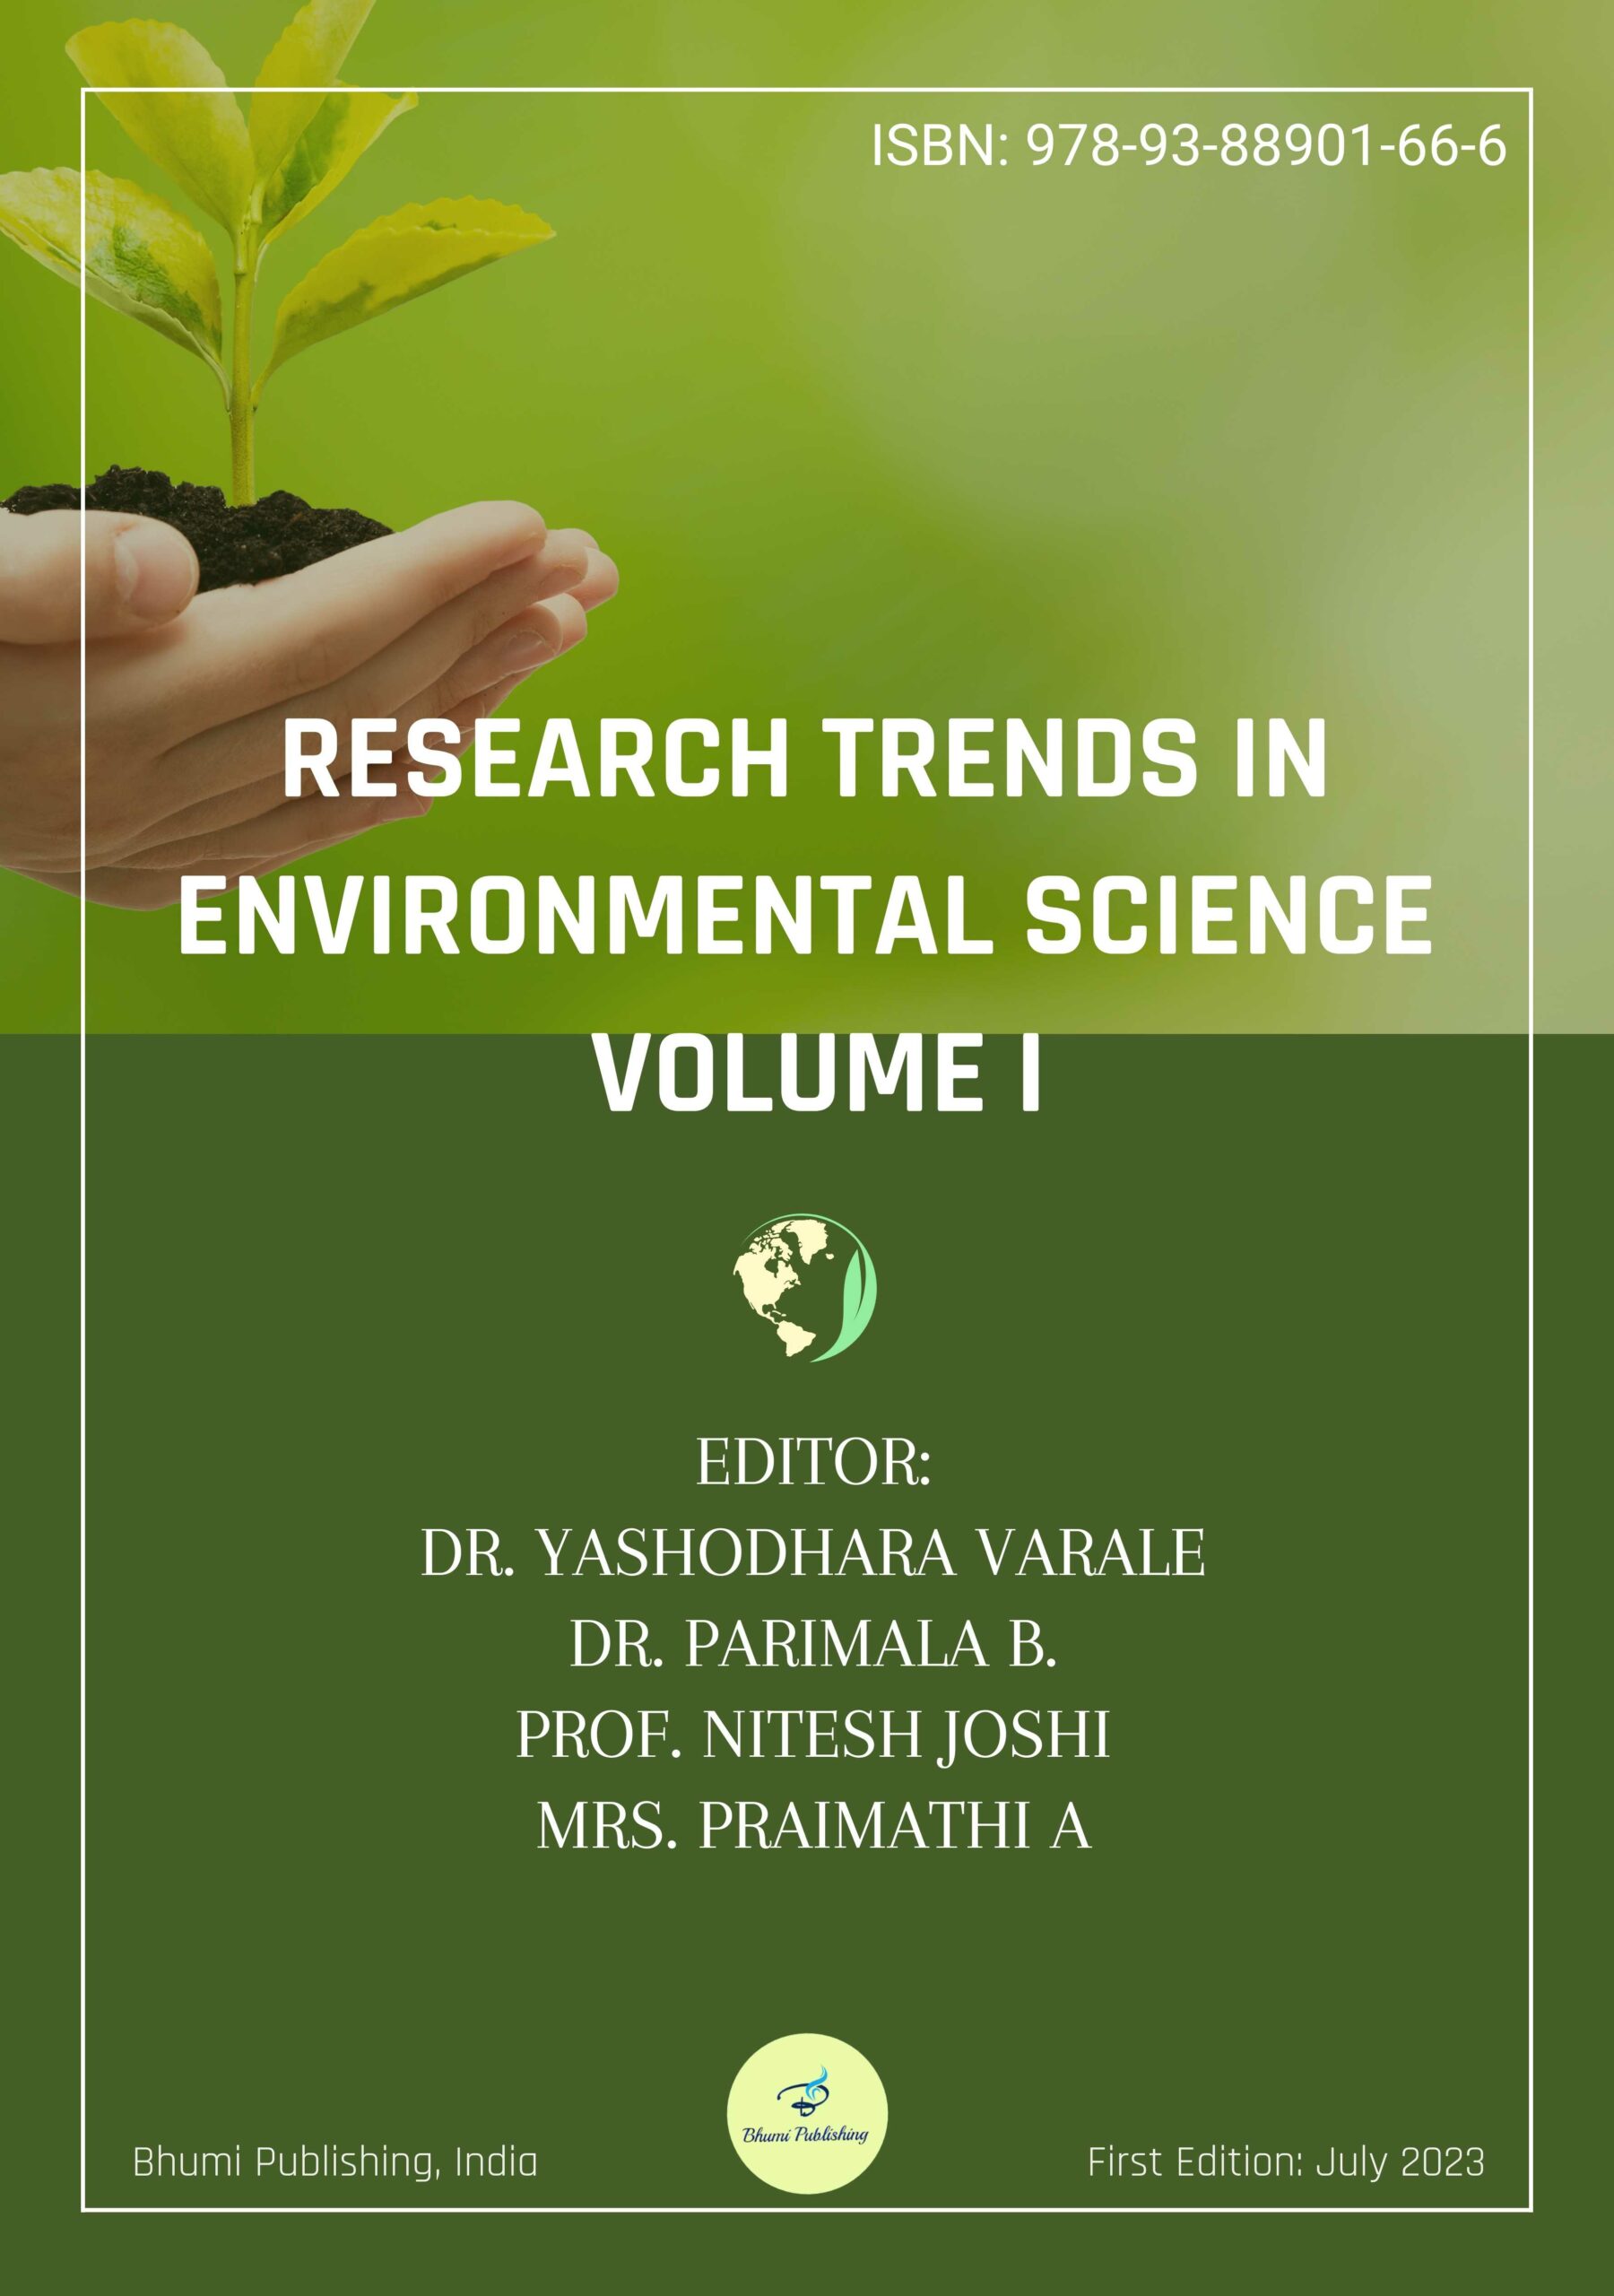 Research Trends in Environmental Science Volume I